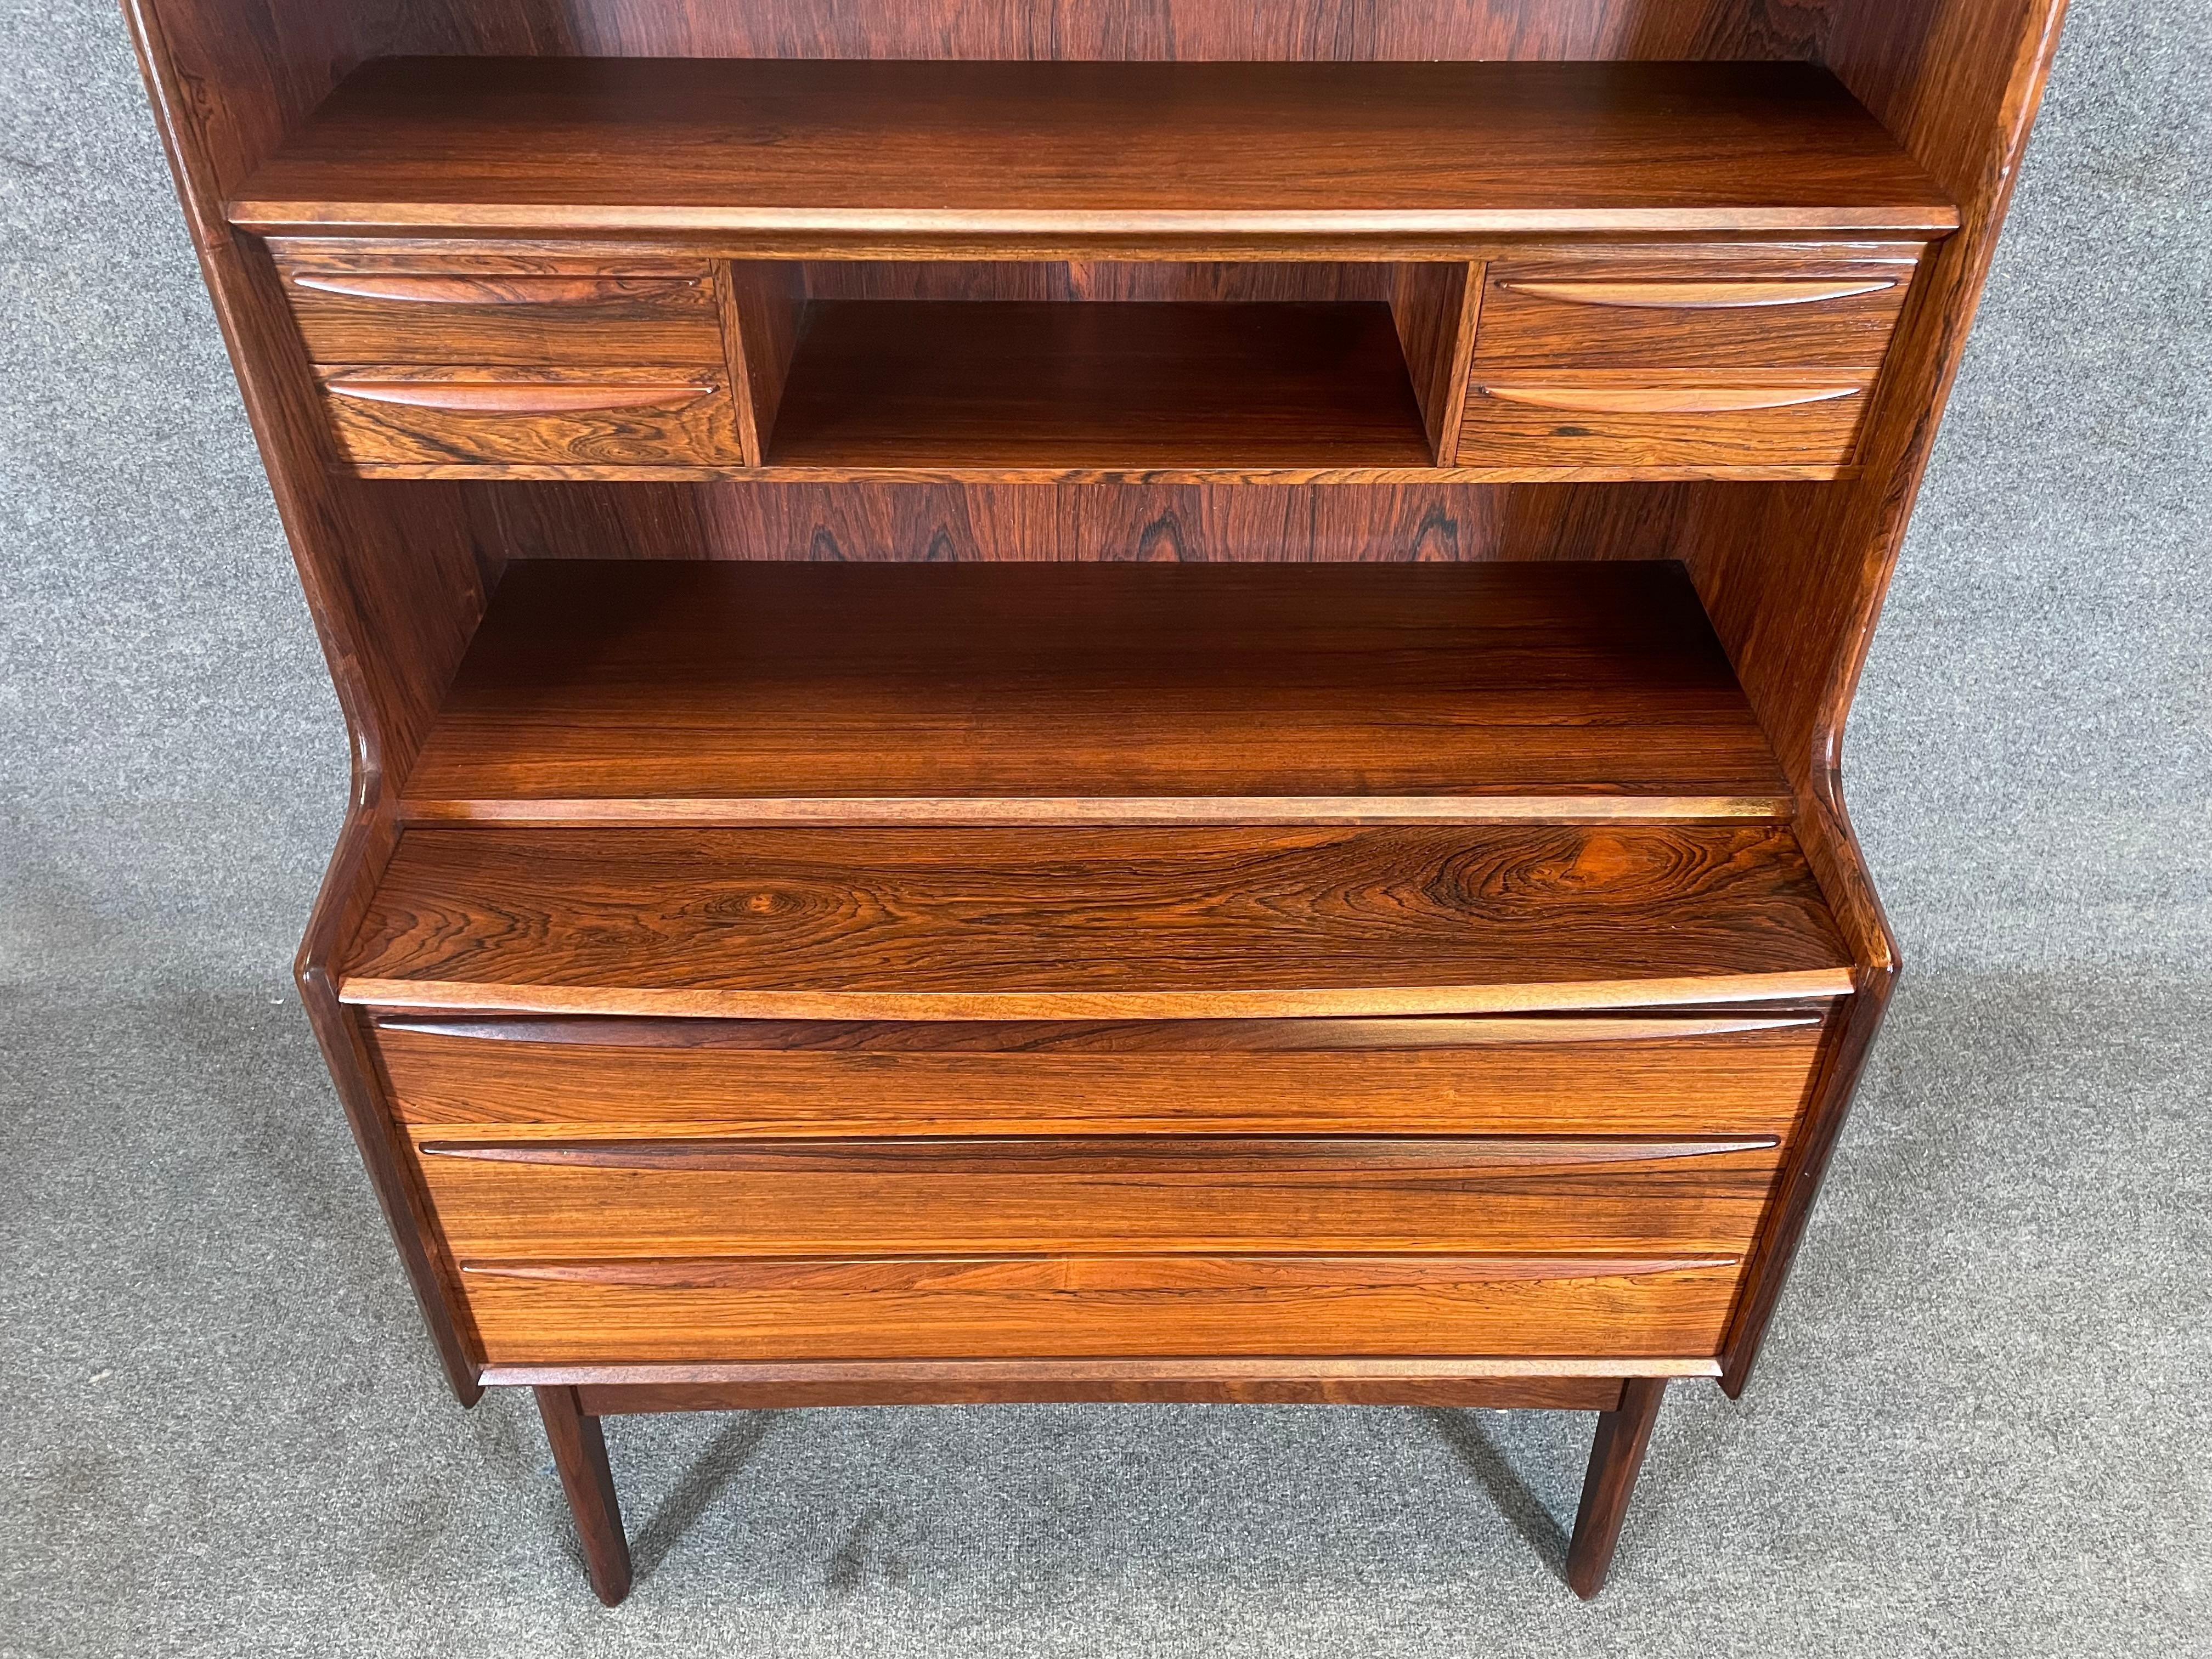 Here is a beautiful Scandinavian modern secretary-desk-bookcase manufactured in Denmark in the 1960's.
This exquisite piece, recently imported from Europe to California before its refinishing, features a vibrant wood grain, a bank of three large